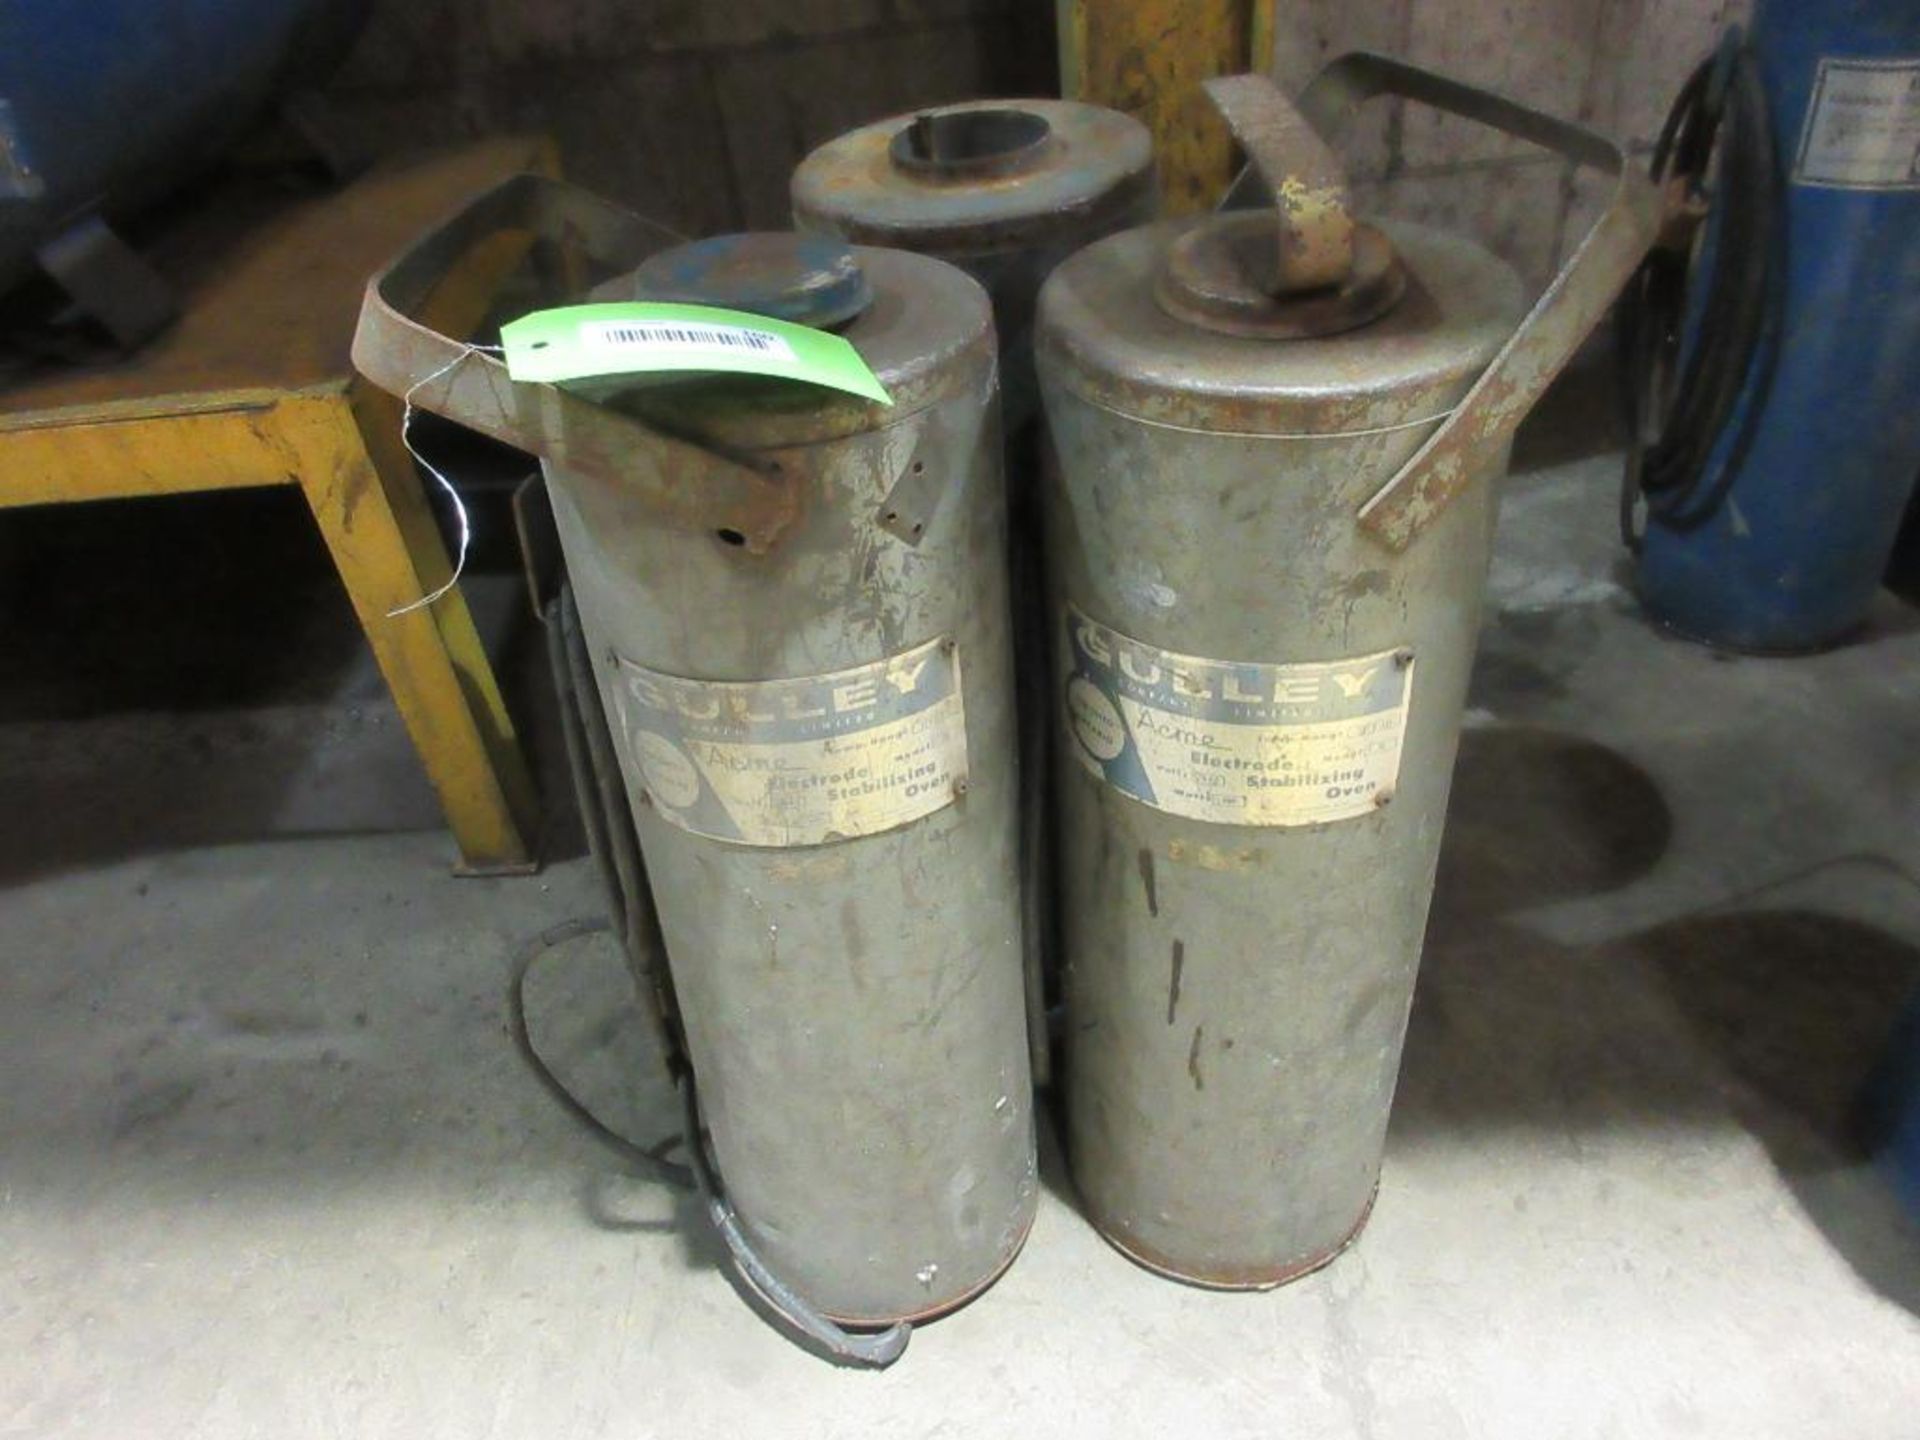 LOT OF 3 GULLEY ELECTRODES MODEL 10 STABILIZING OVENS (1 MISSING CAP) (CENTRAL CRIB AREA)